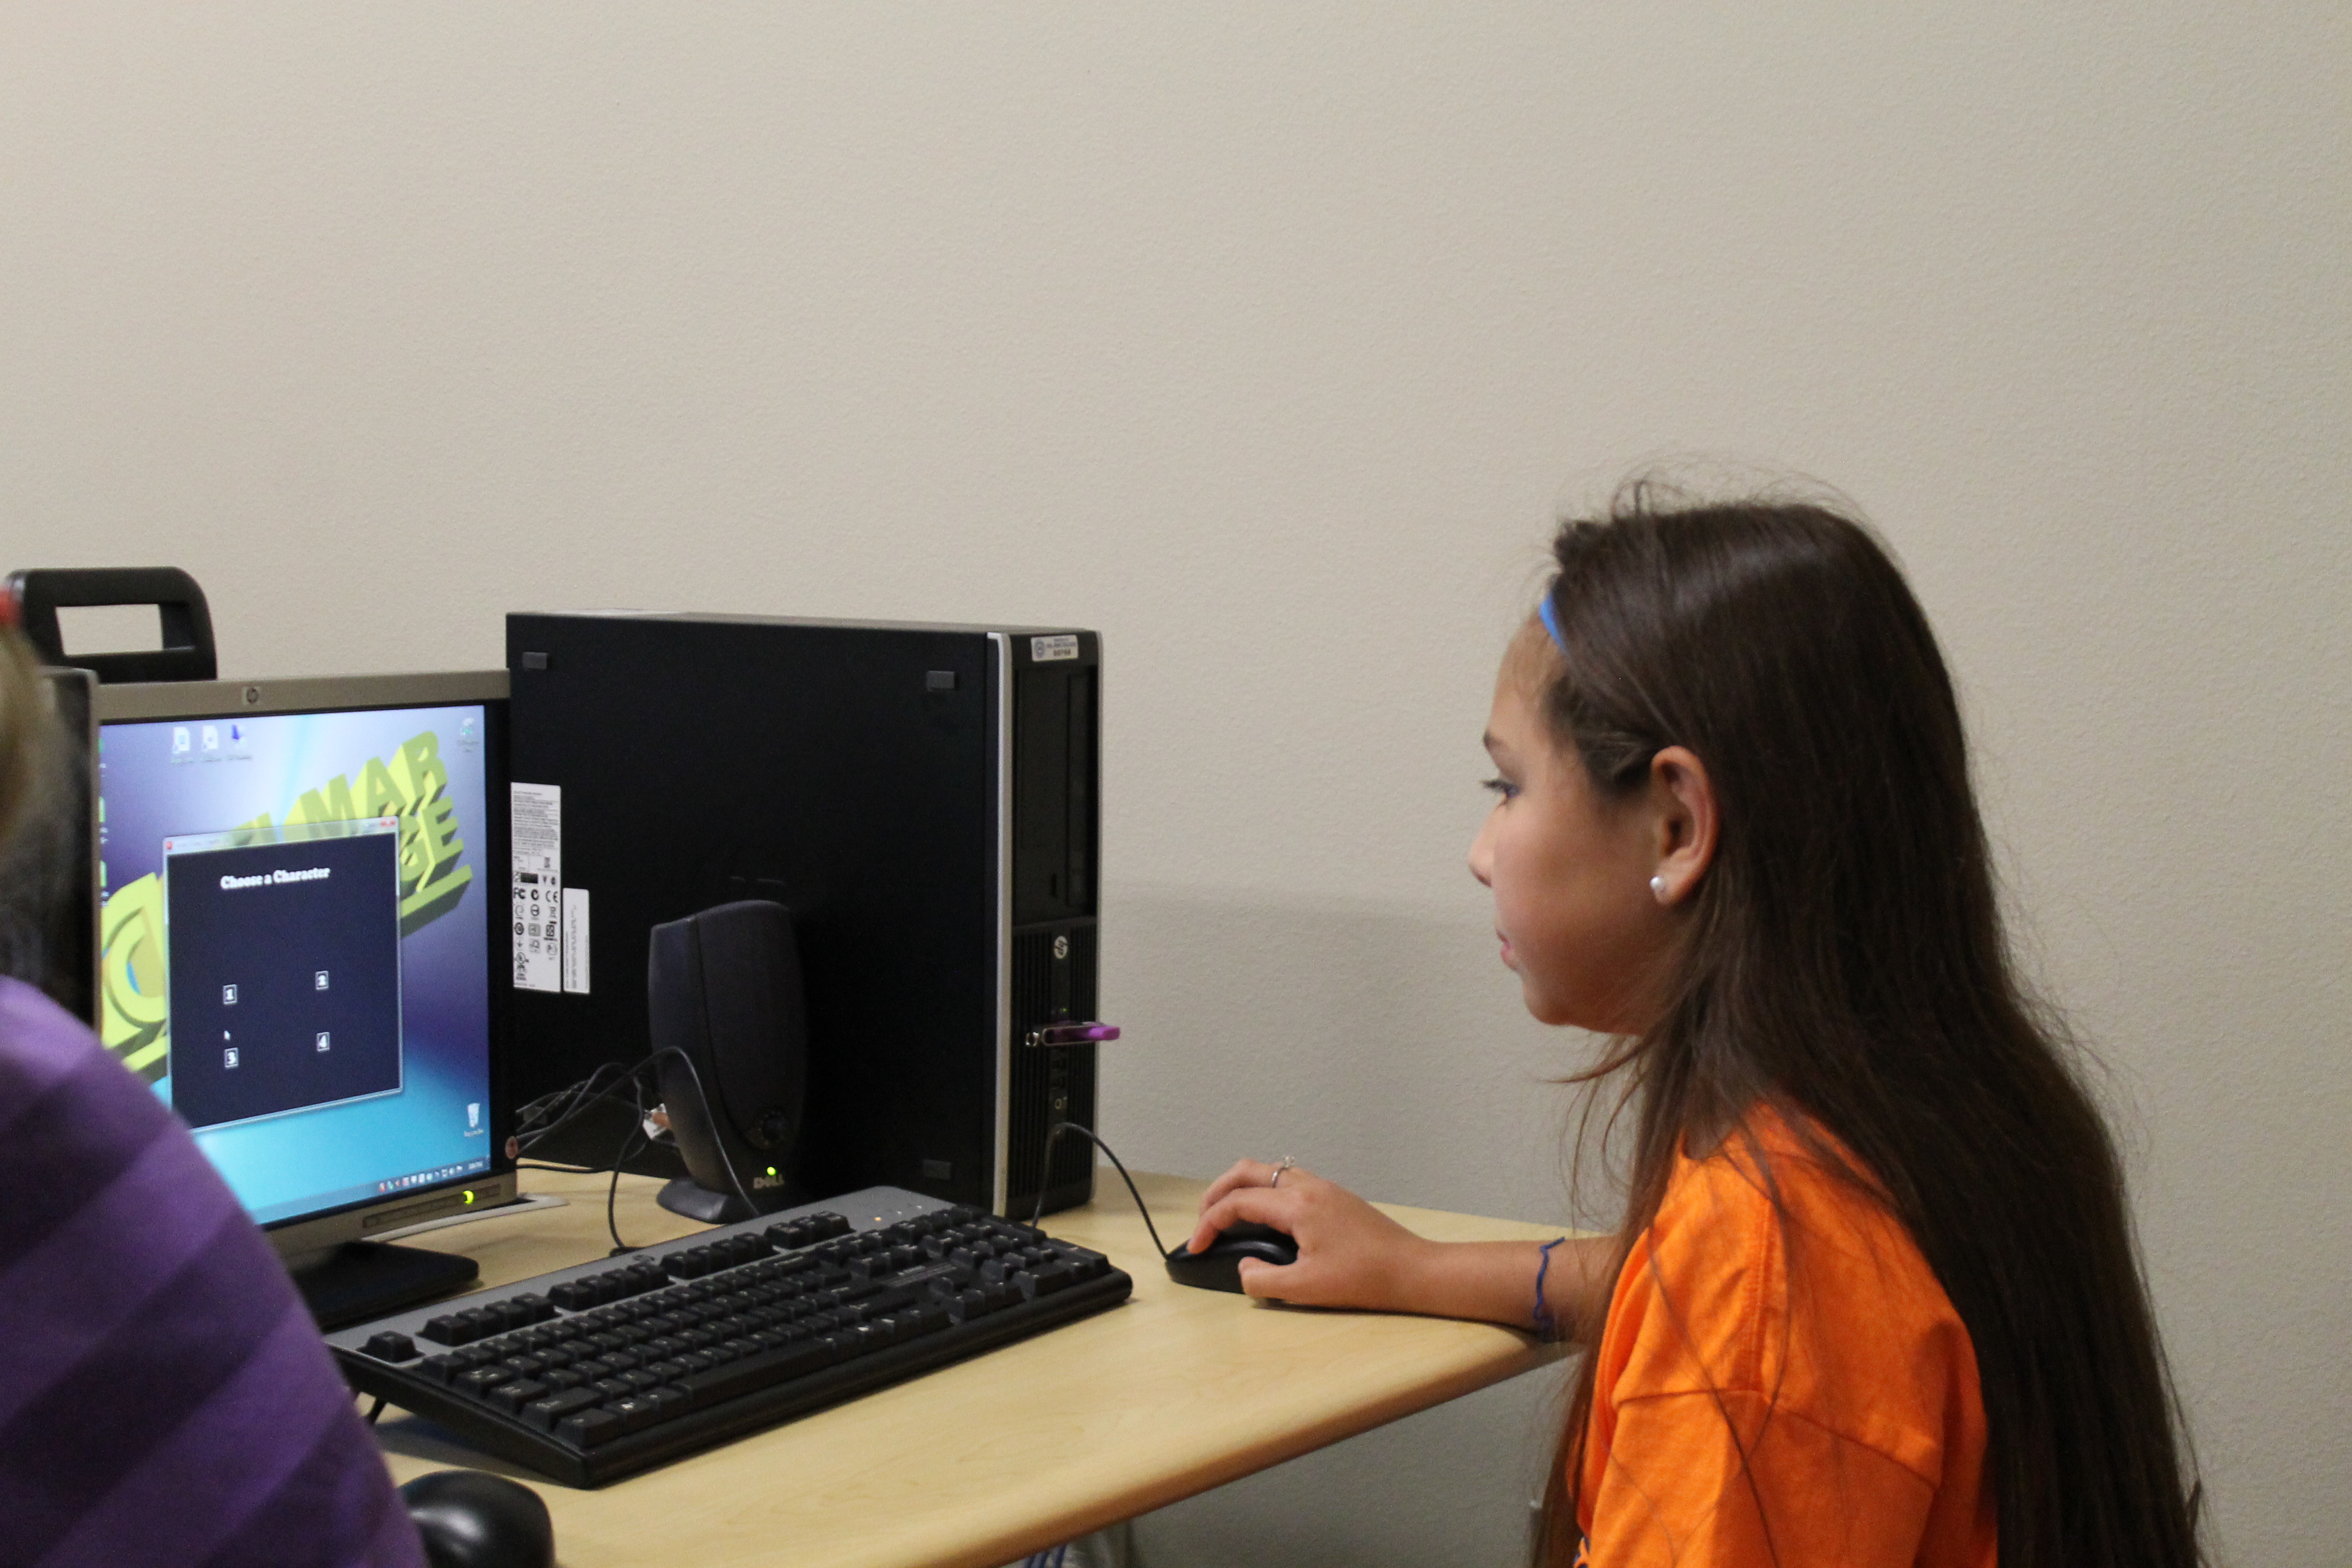 Local youth create their own video games